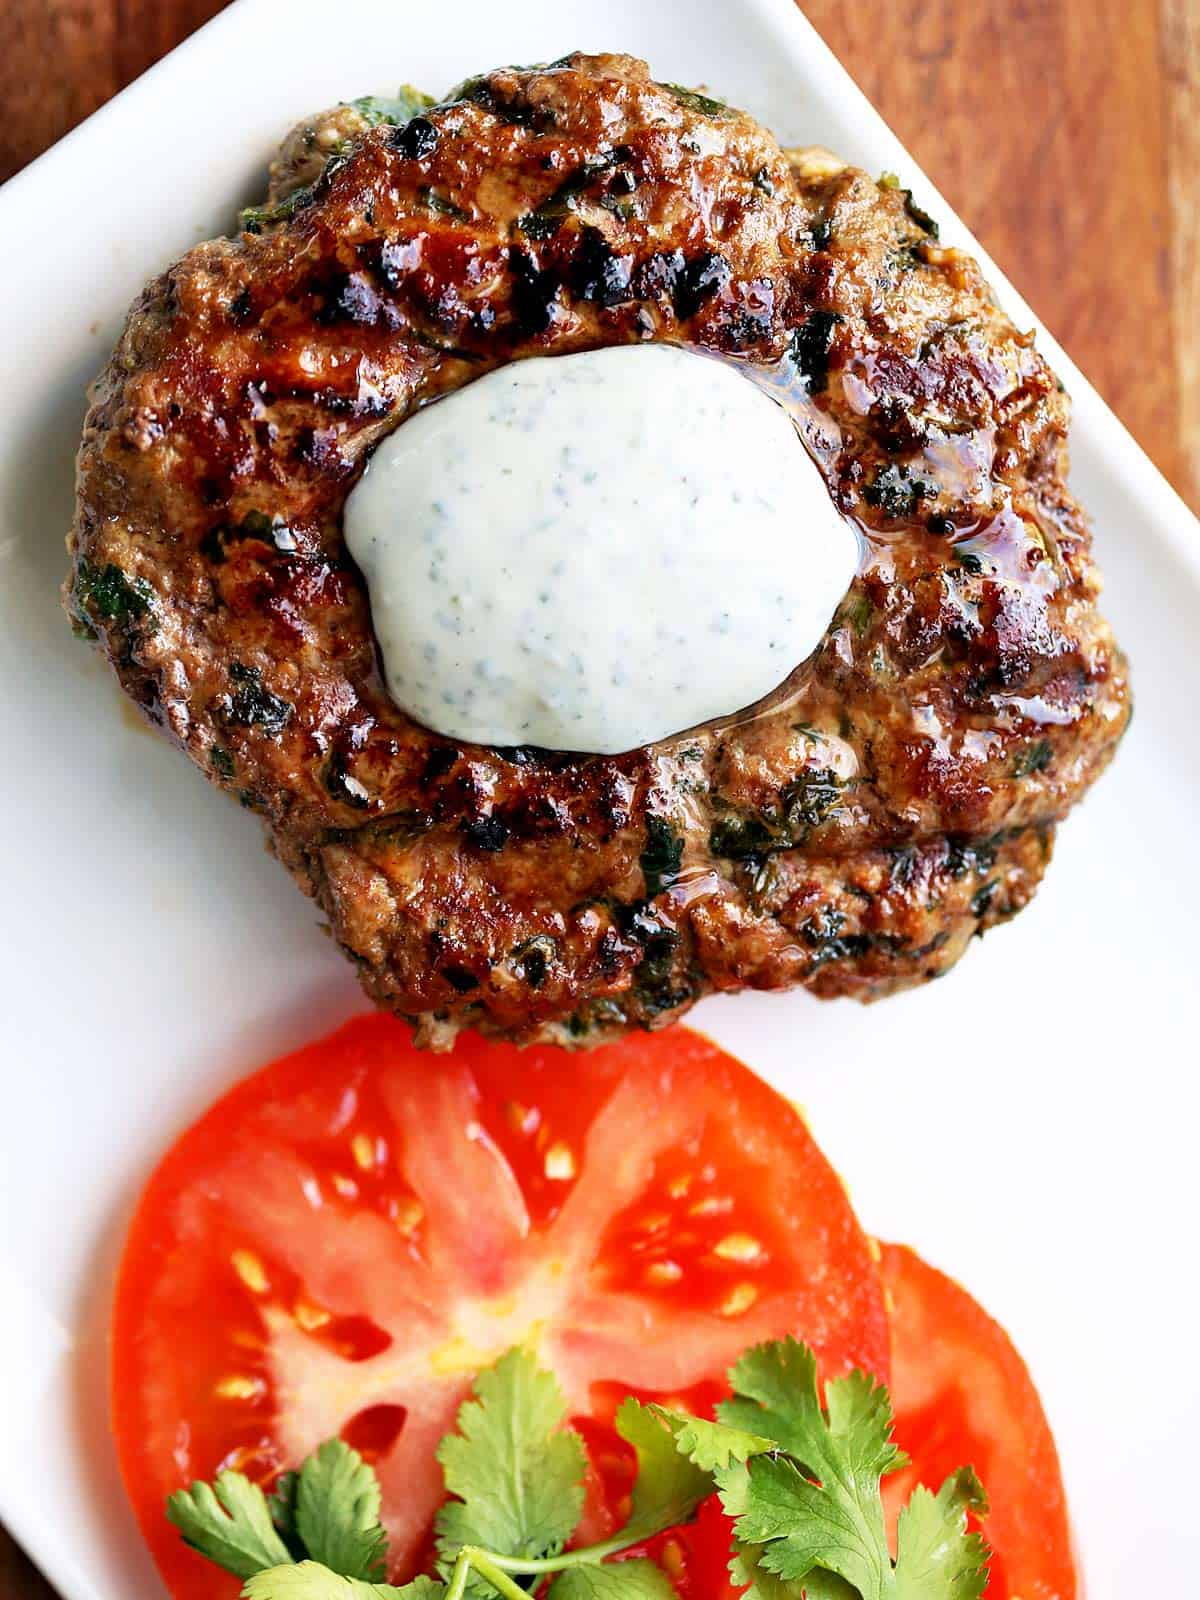 A lamb burger is topped with a yogurt sauce.